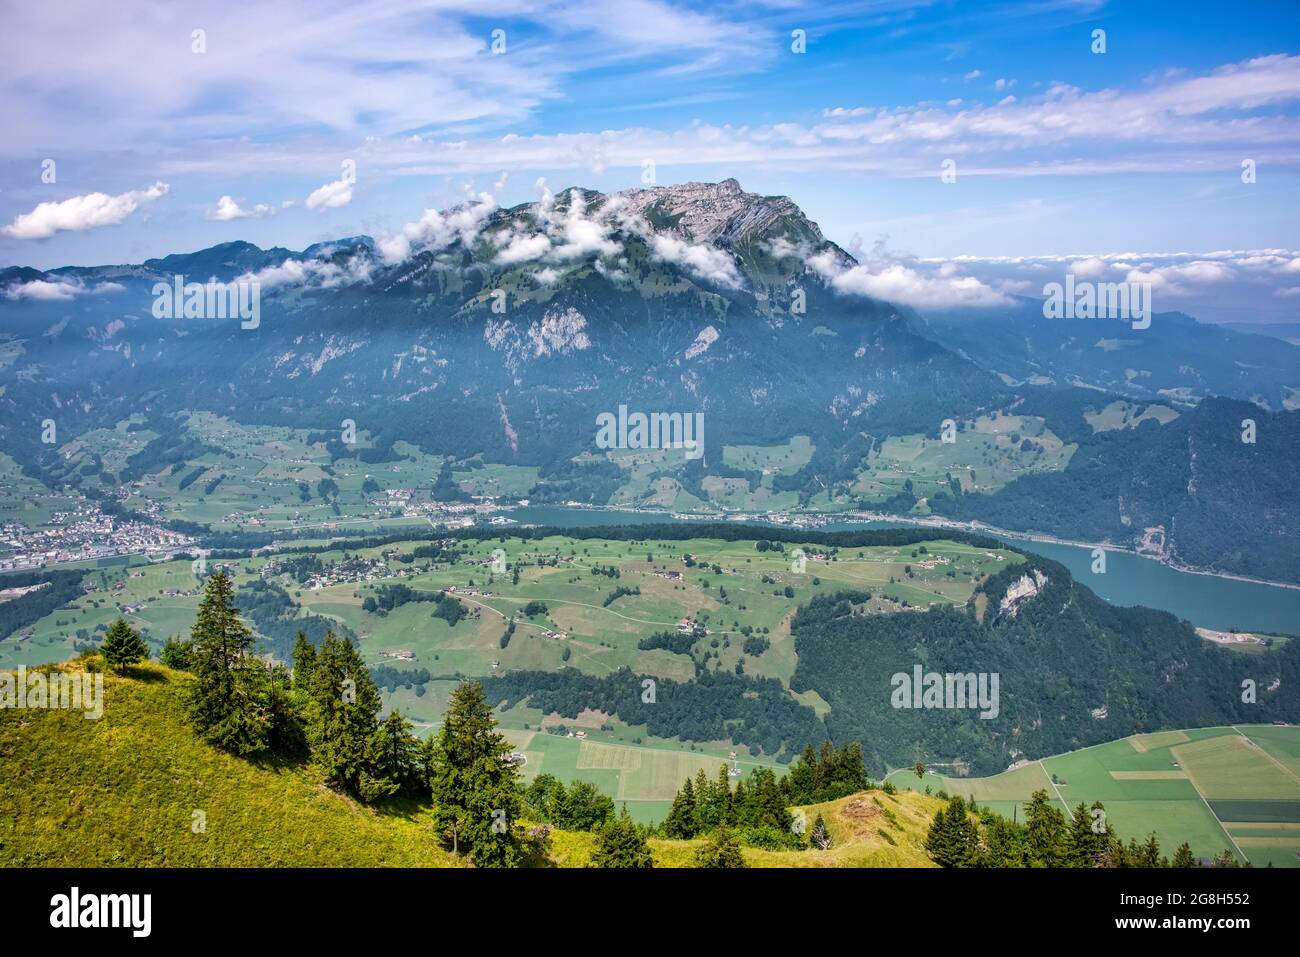 Pilatus, also often referred to as Mount Pilatus, is a majestic mountain overlooking Lucerne in Central Switzerland. Stock Photo